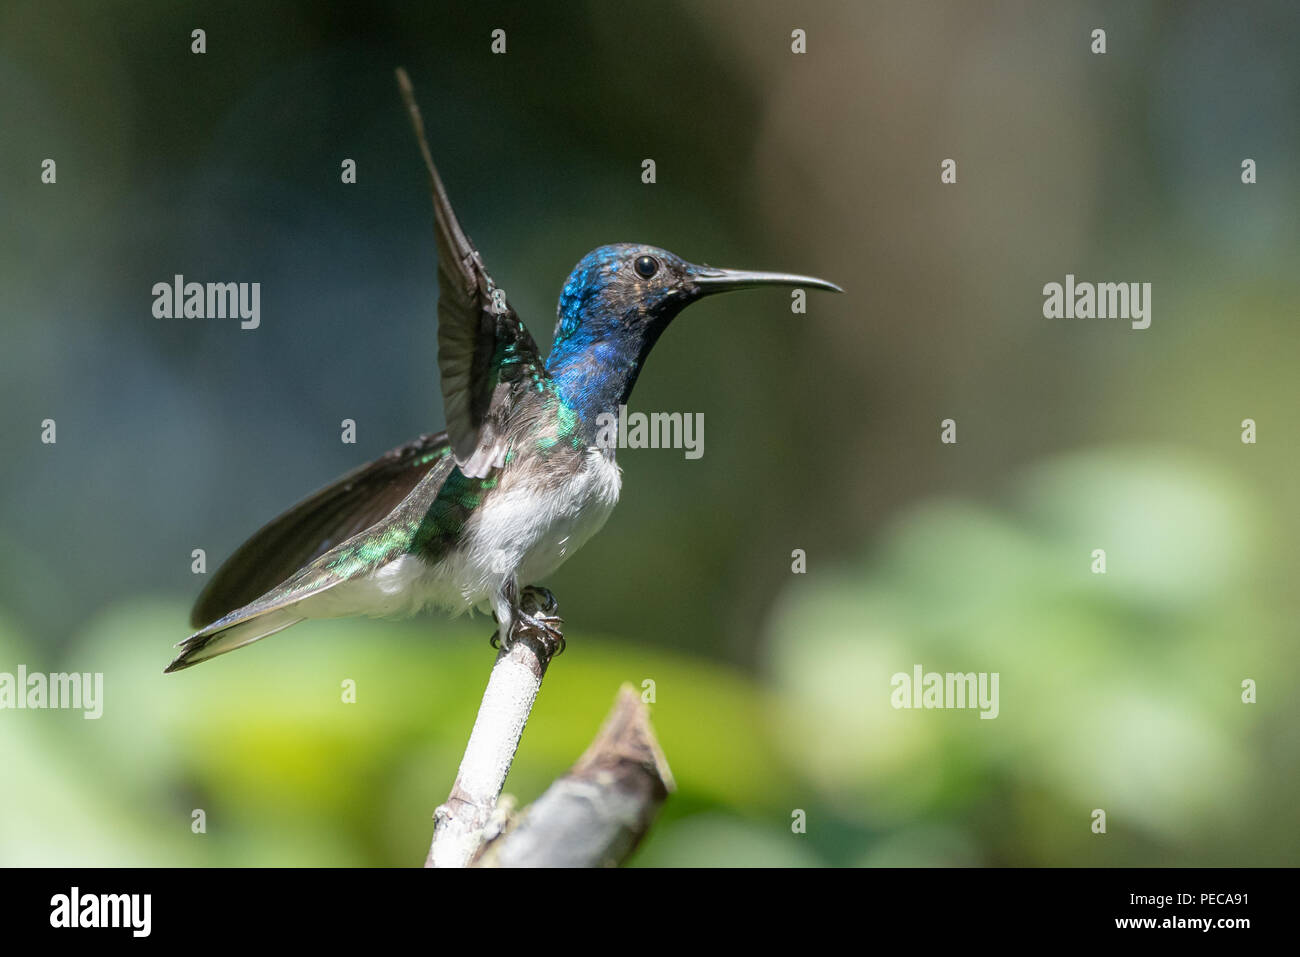 Hummingbird taking off from a branch, Mindo Cloud Forest, Ecuador Stock Photo